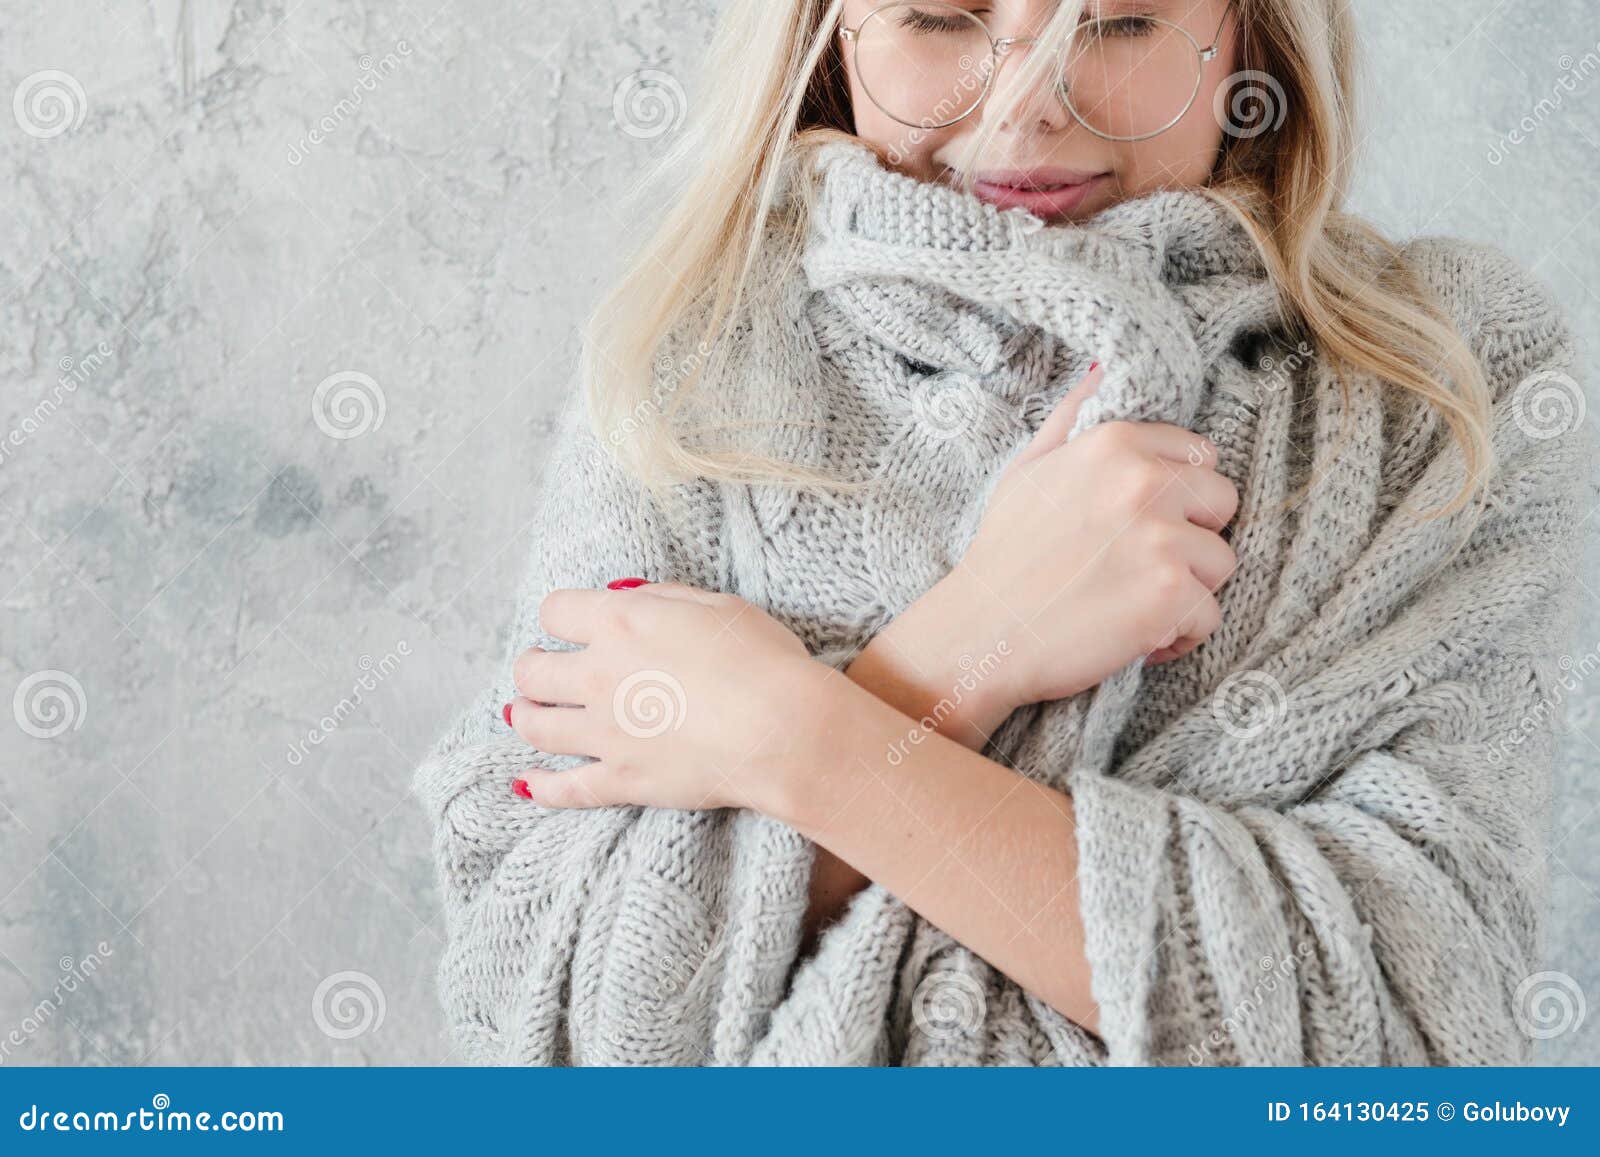 Winter Coziness Peaceful Woman Knitted Blanket Stock Image - Image of